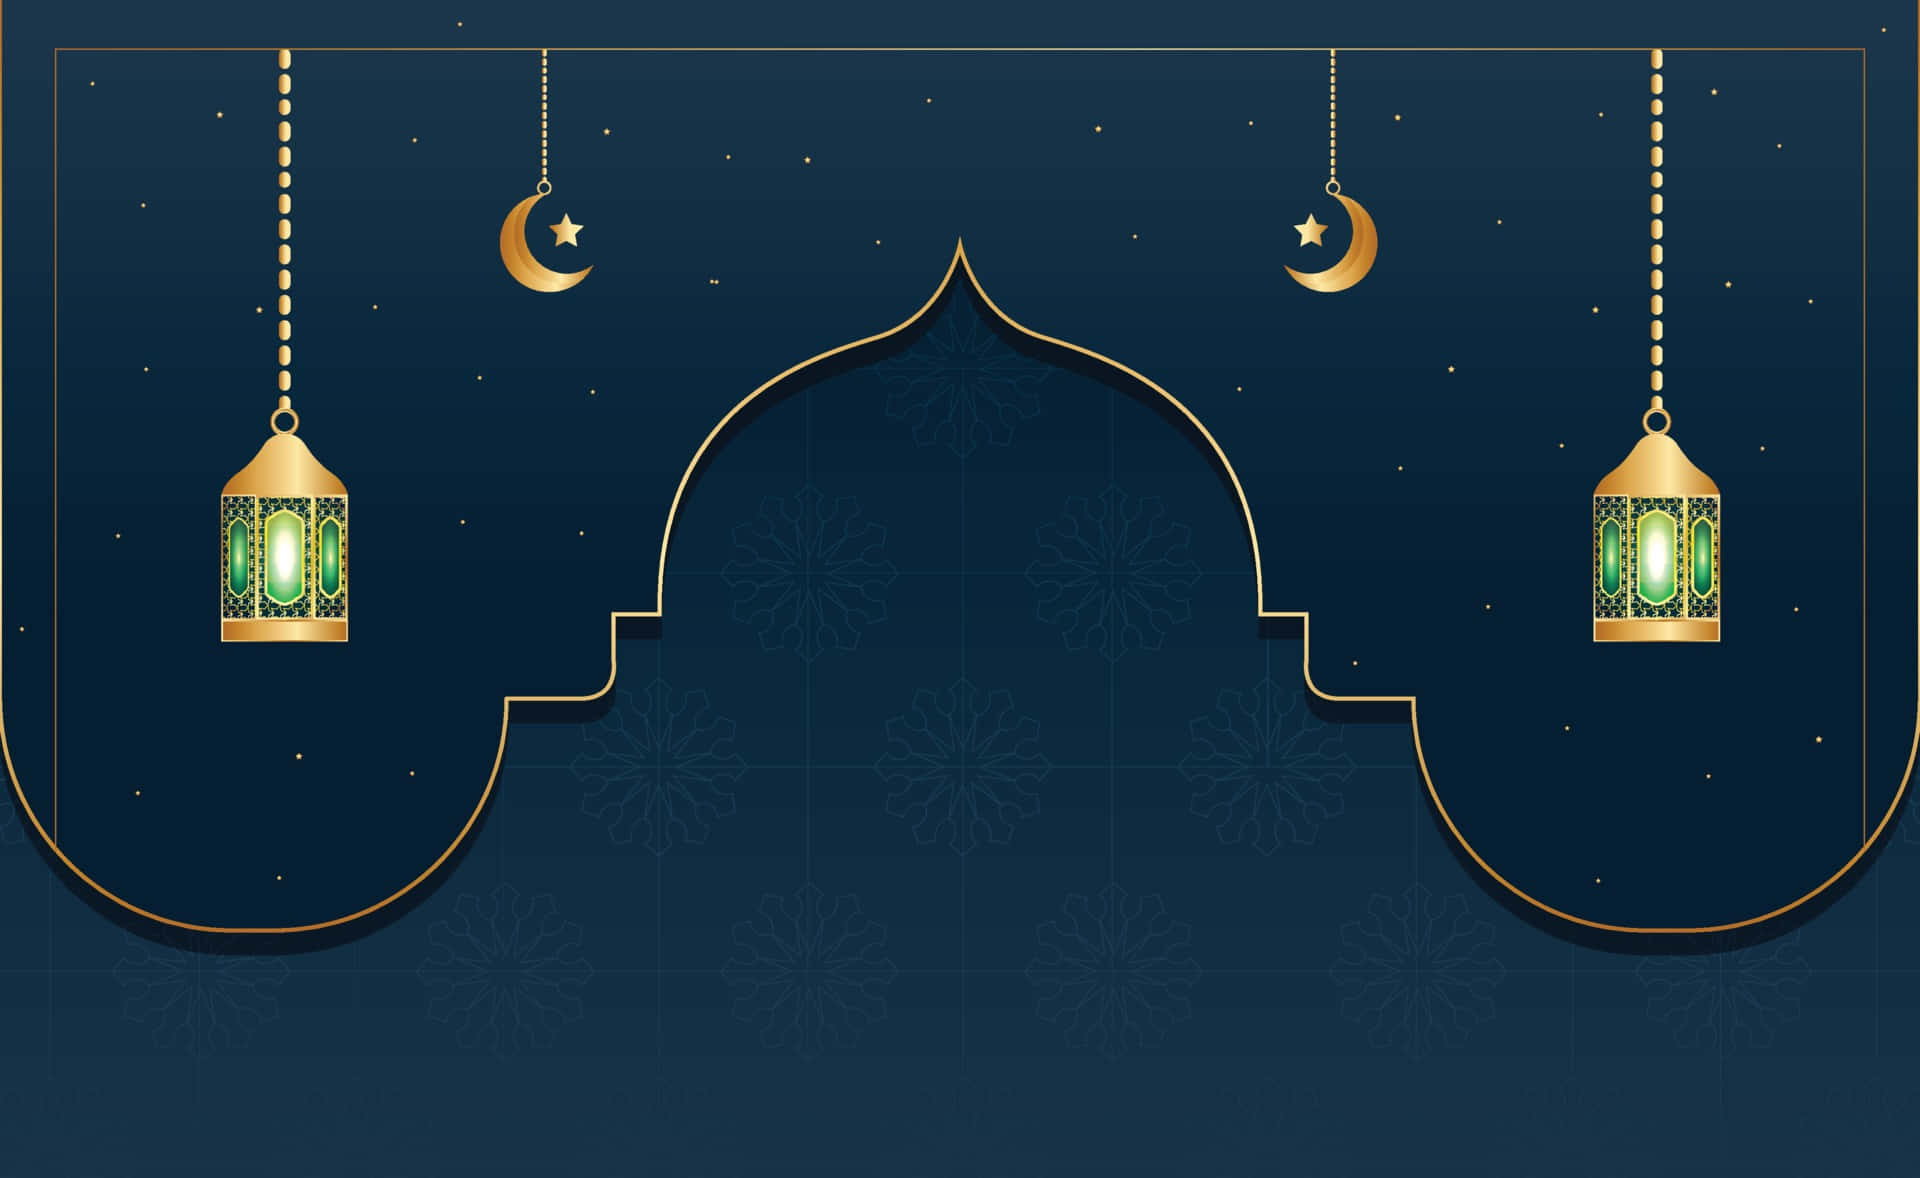 a blue background with a golden lantern and crescent